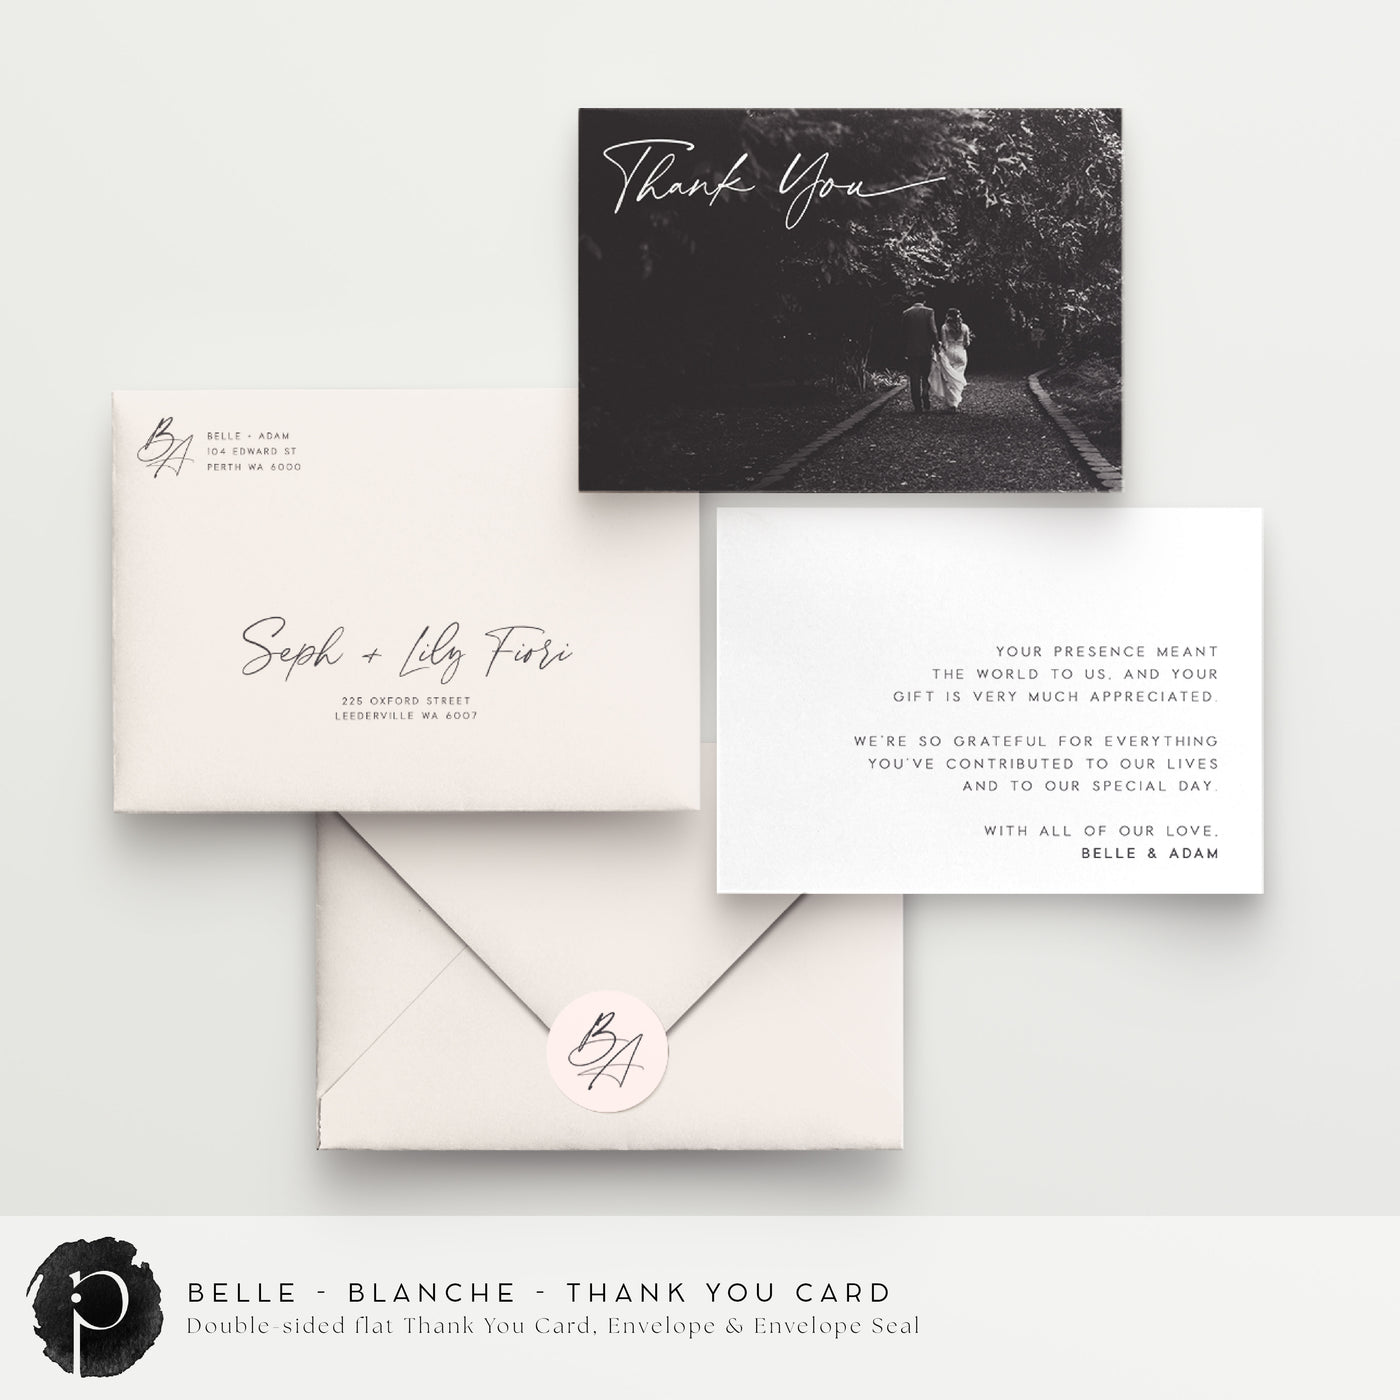 Belle - Wedding Thank You Cards